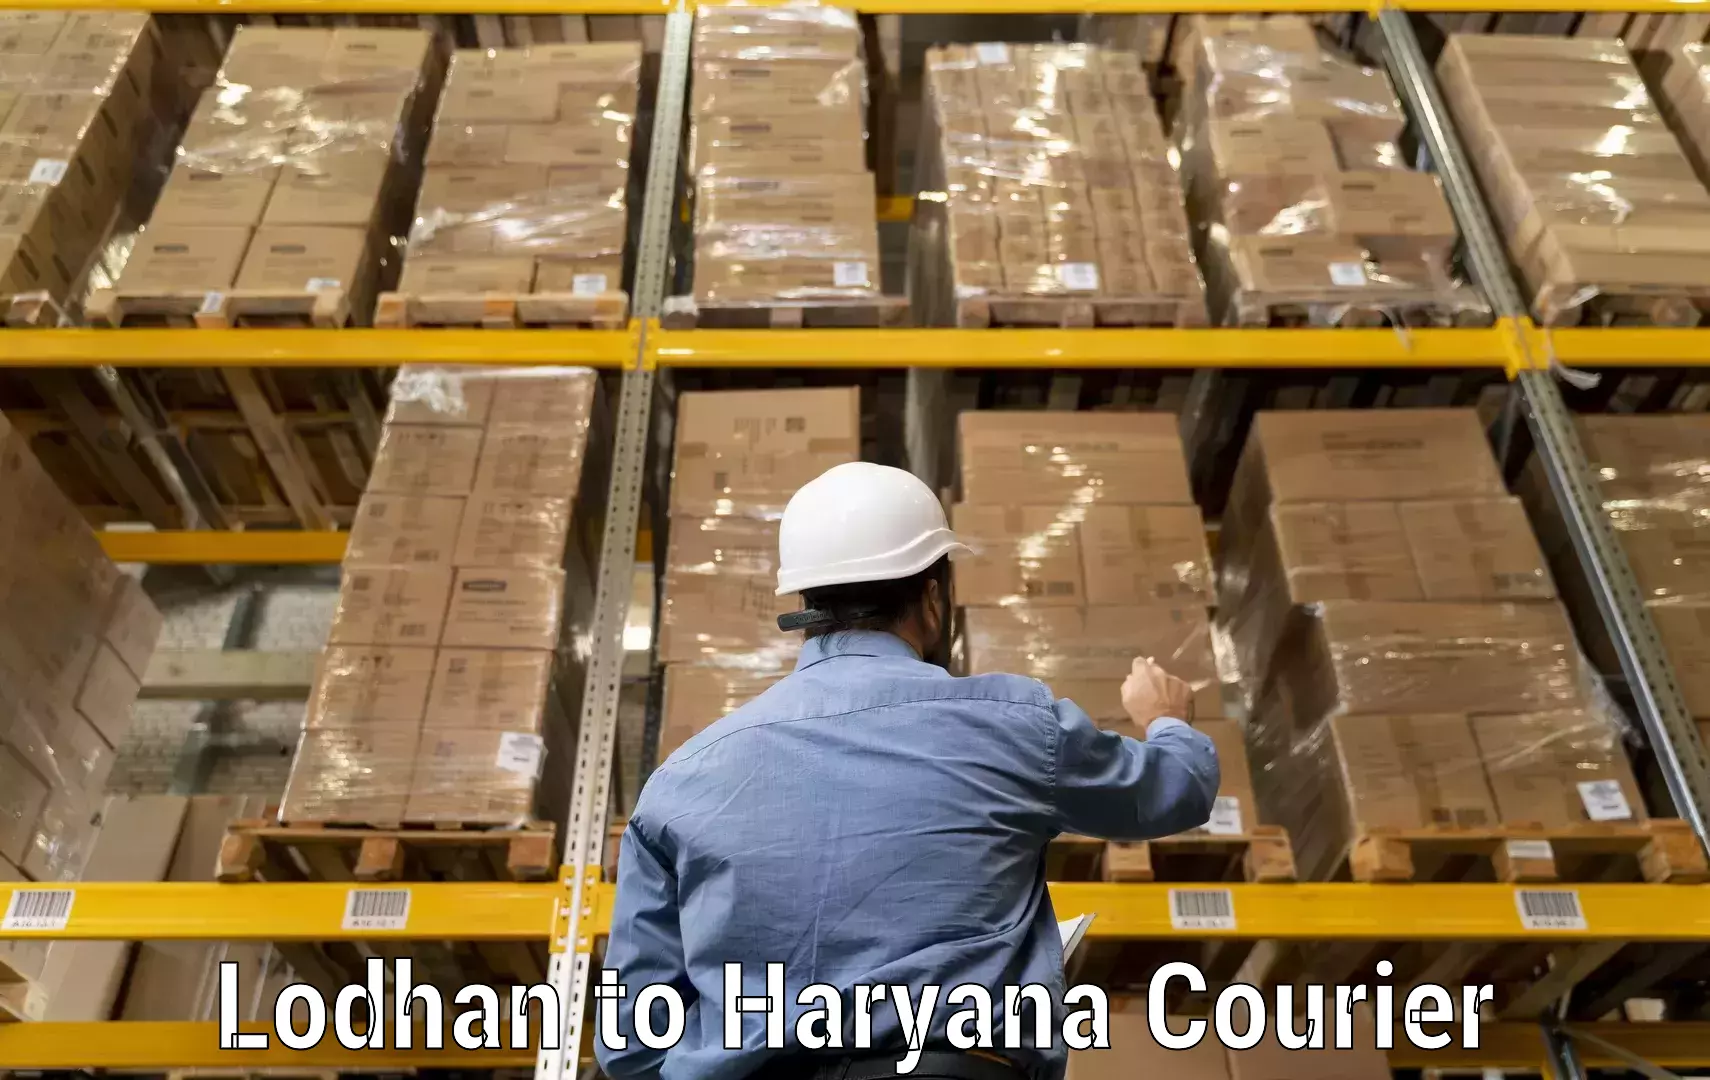 Reliable parcel services Lodhan to Haryana